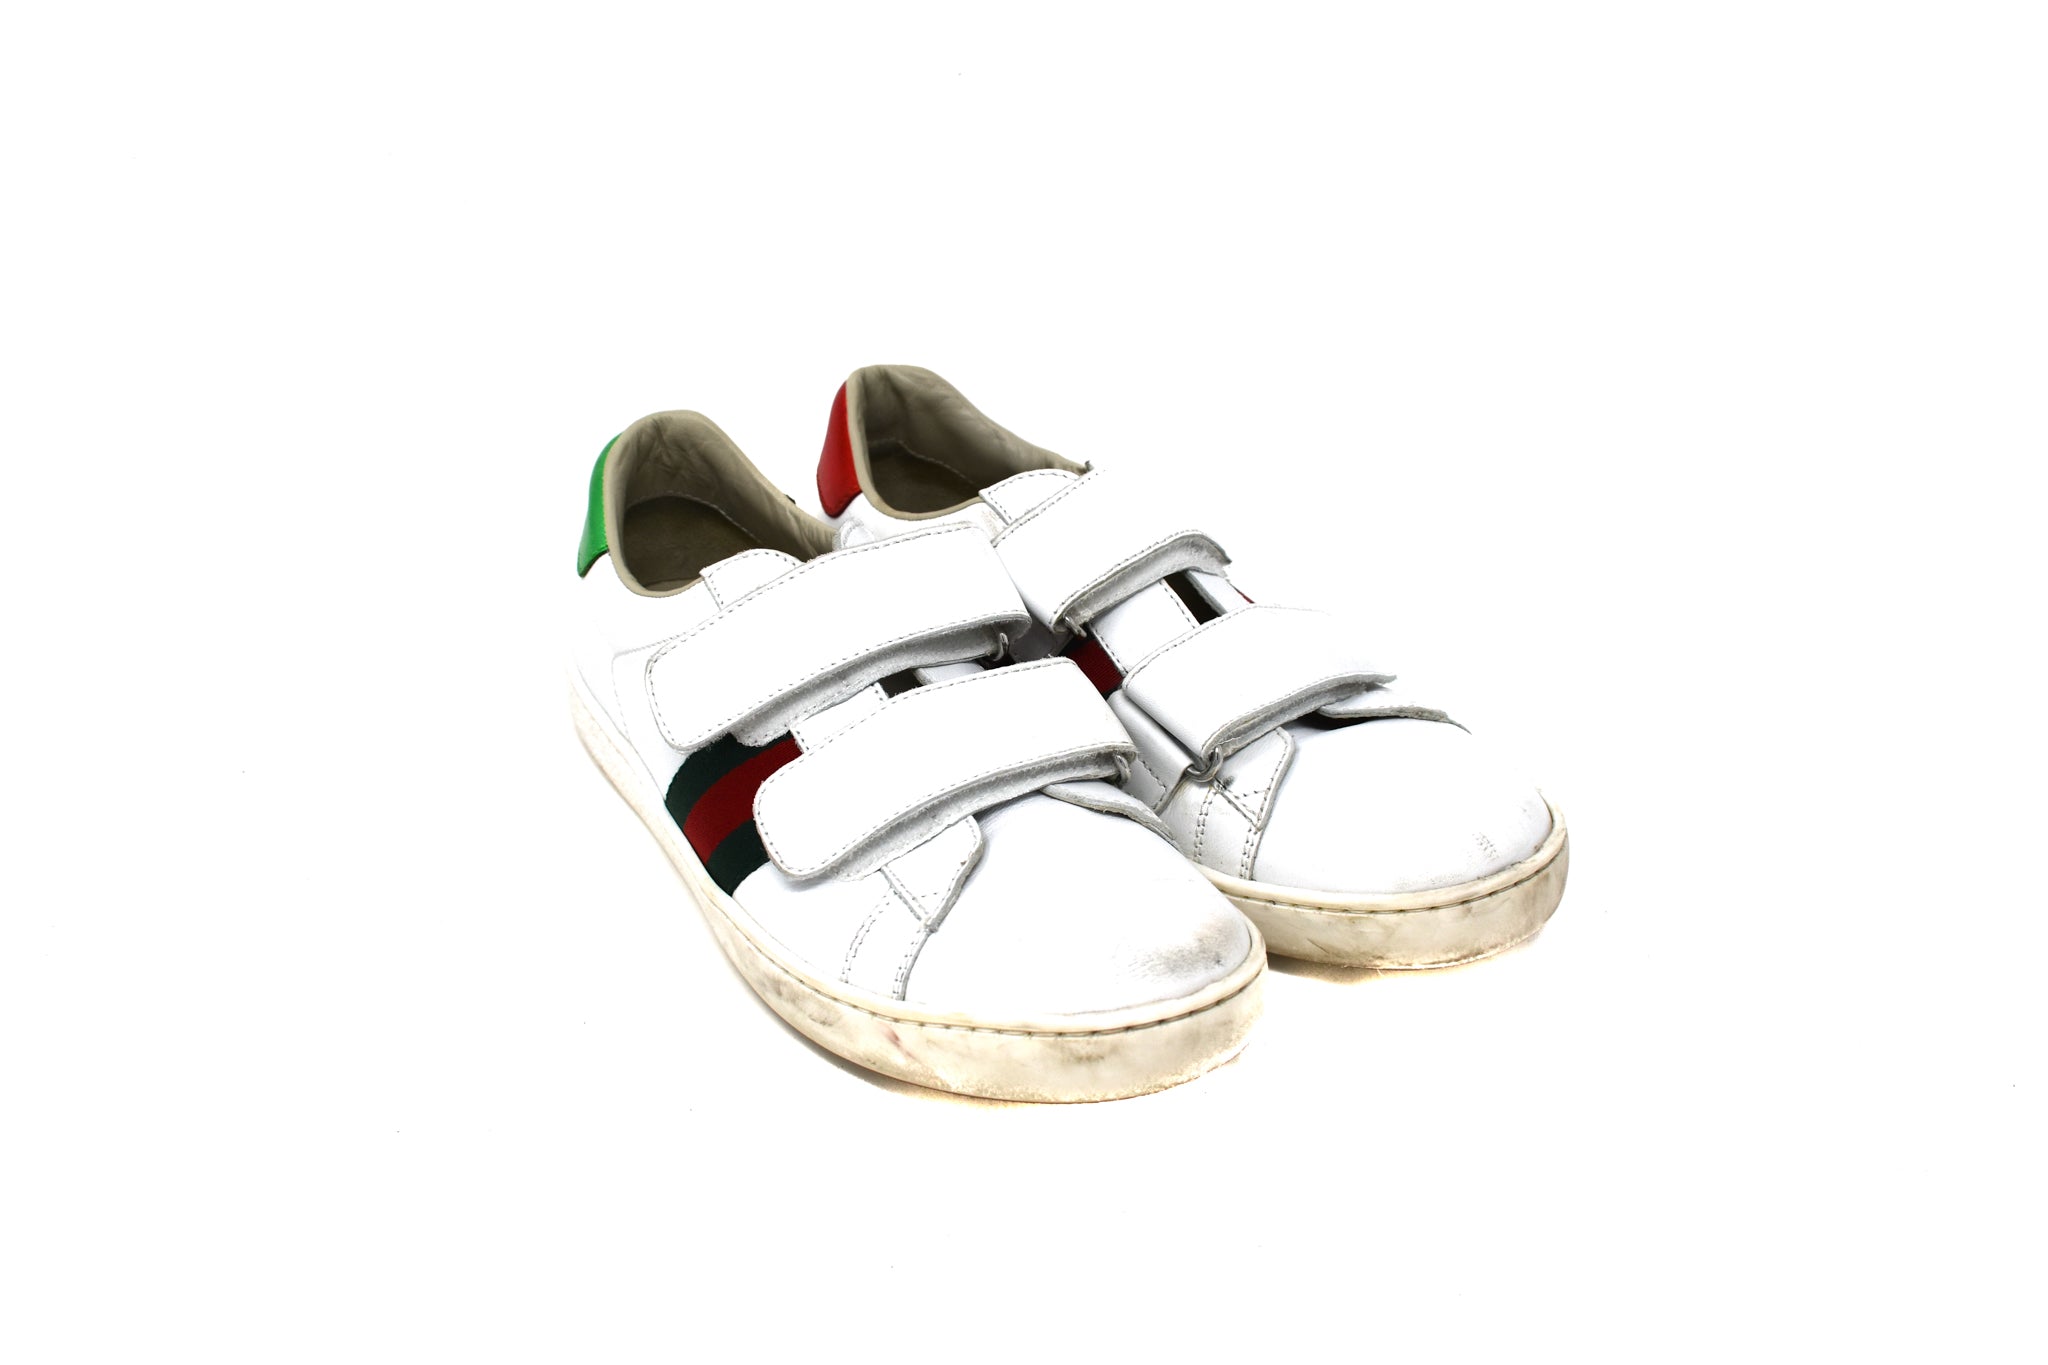 gucci trainers size 1